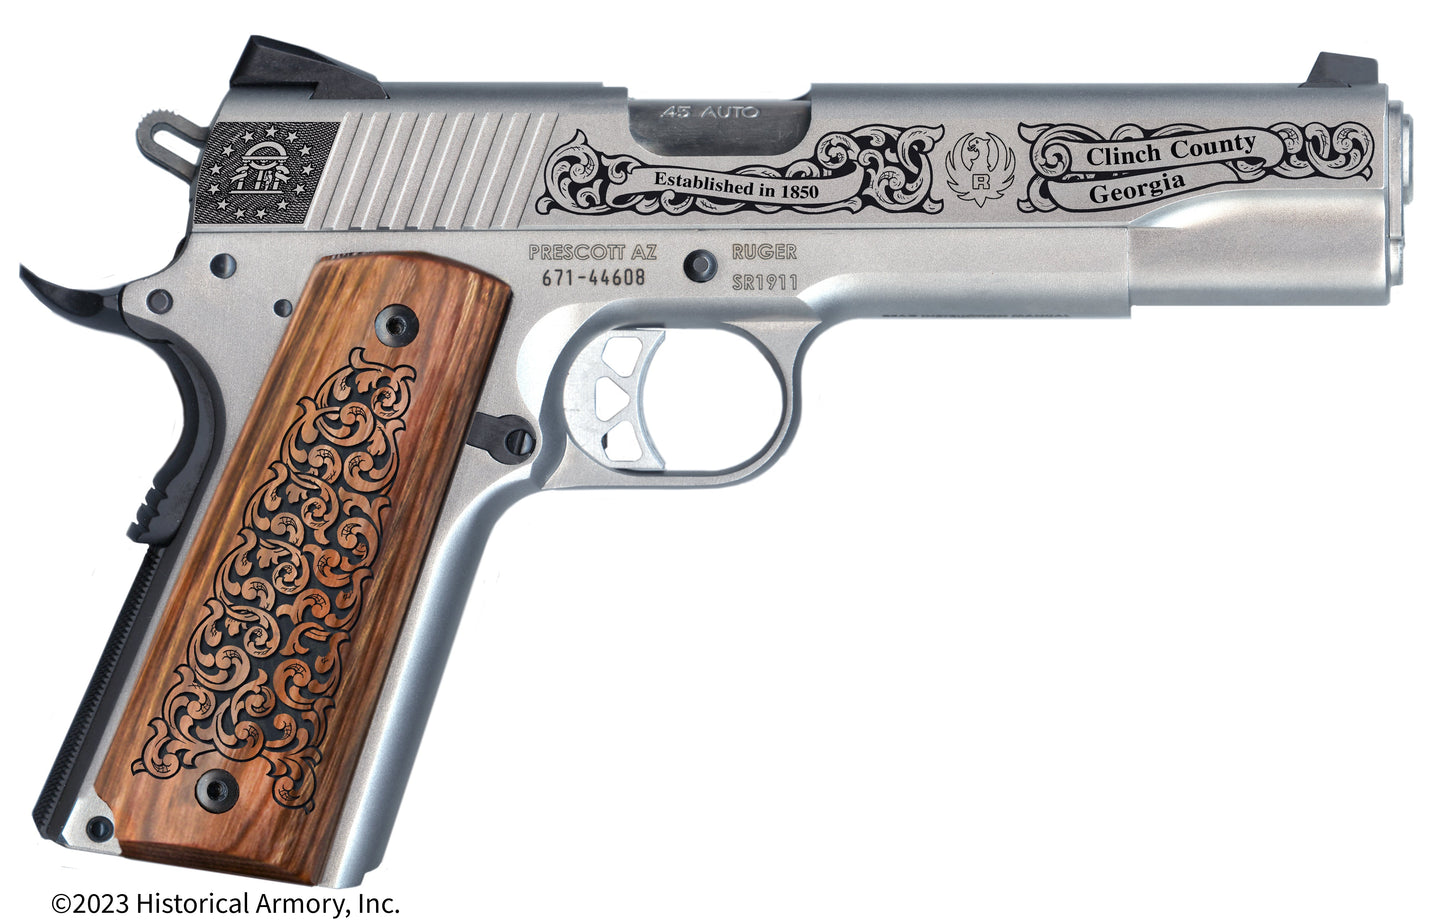 Clinch County Georgia Personalized Engraved .45 Auto Ruger 1911